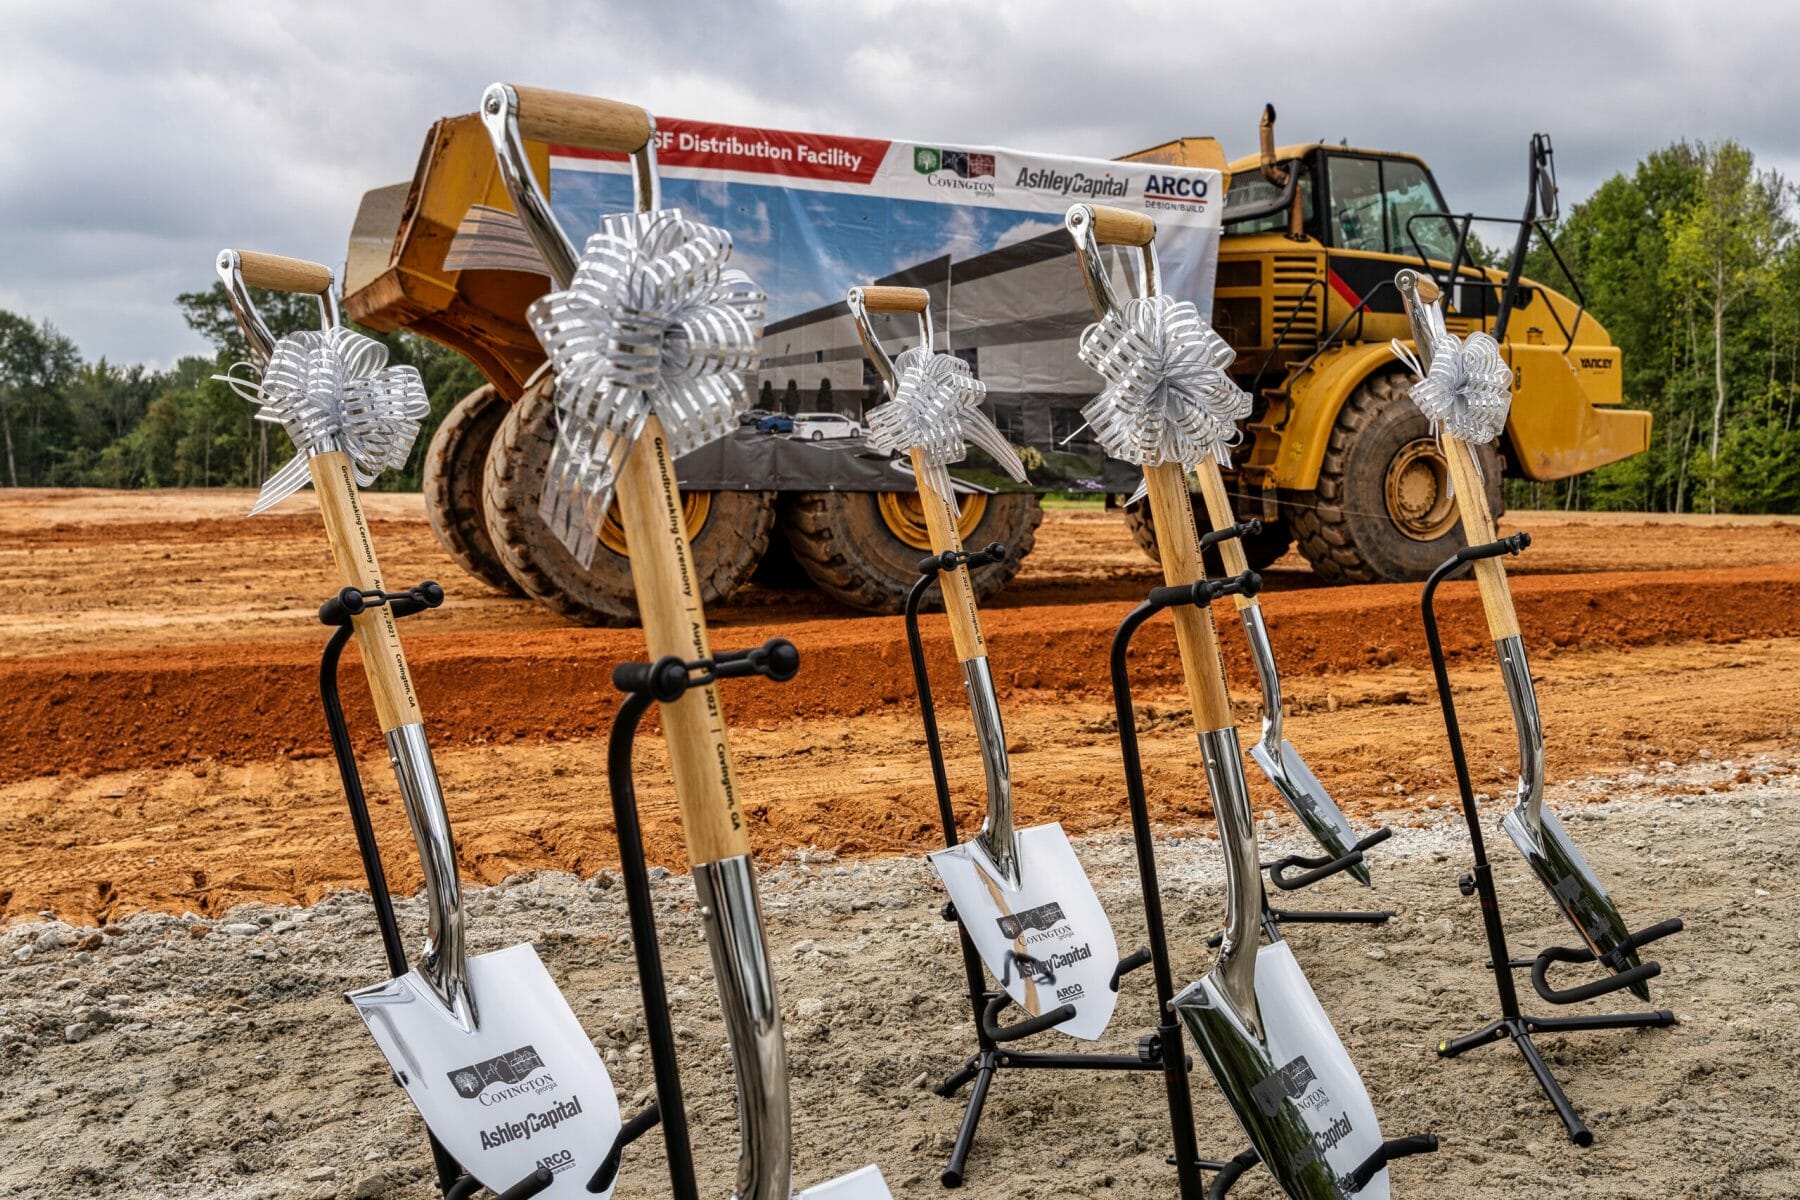 Construction Begins on New 322,560 SF Distribution Facility for Ashley Capital 1